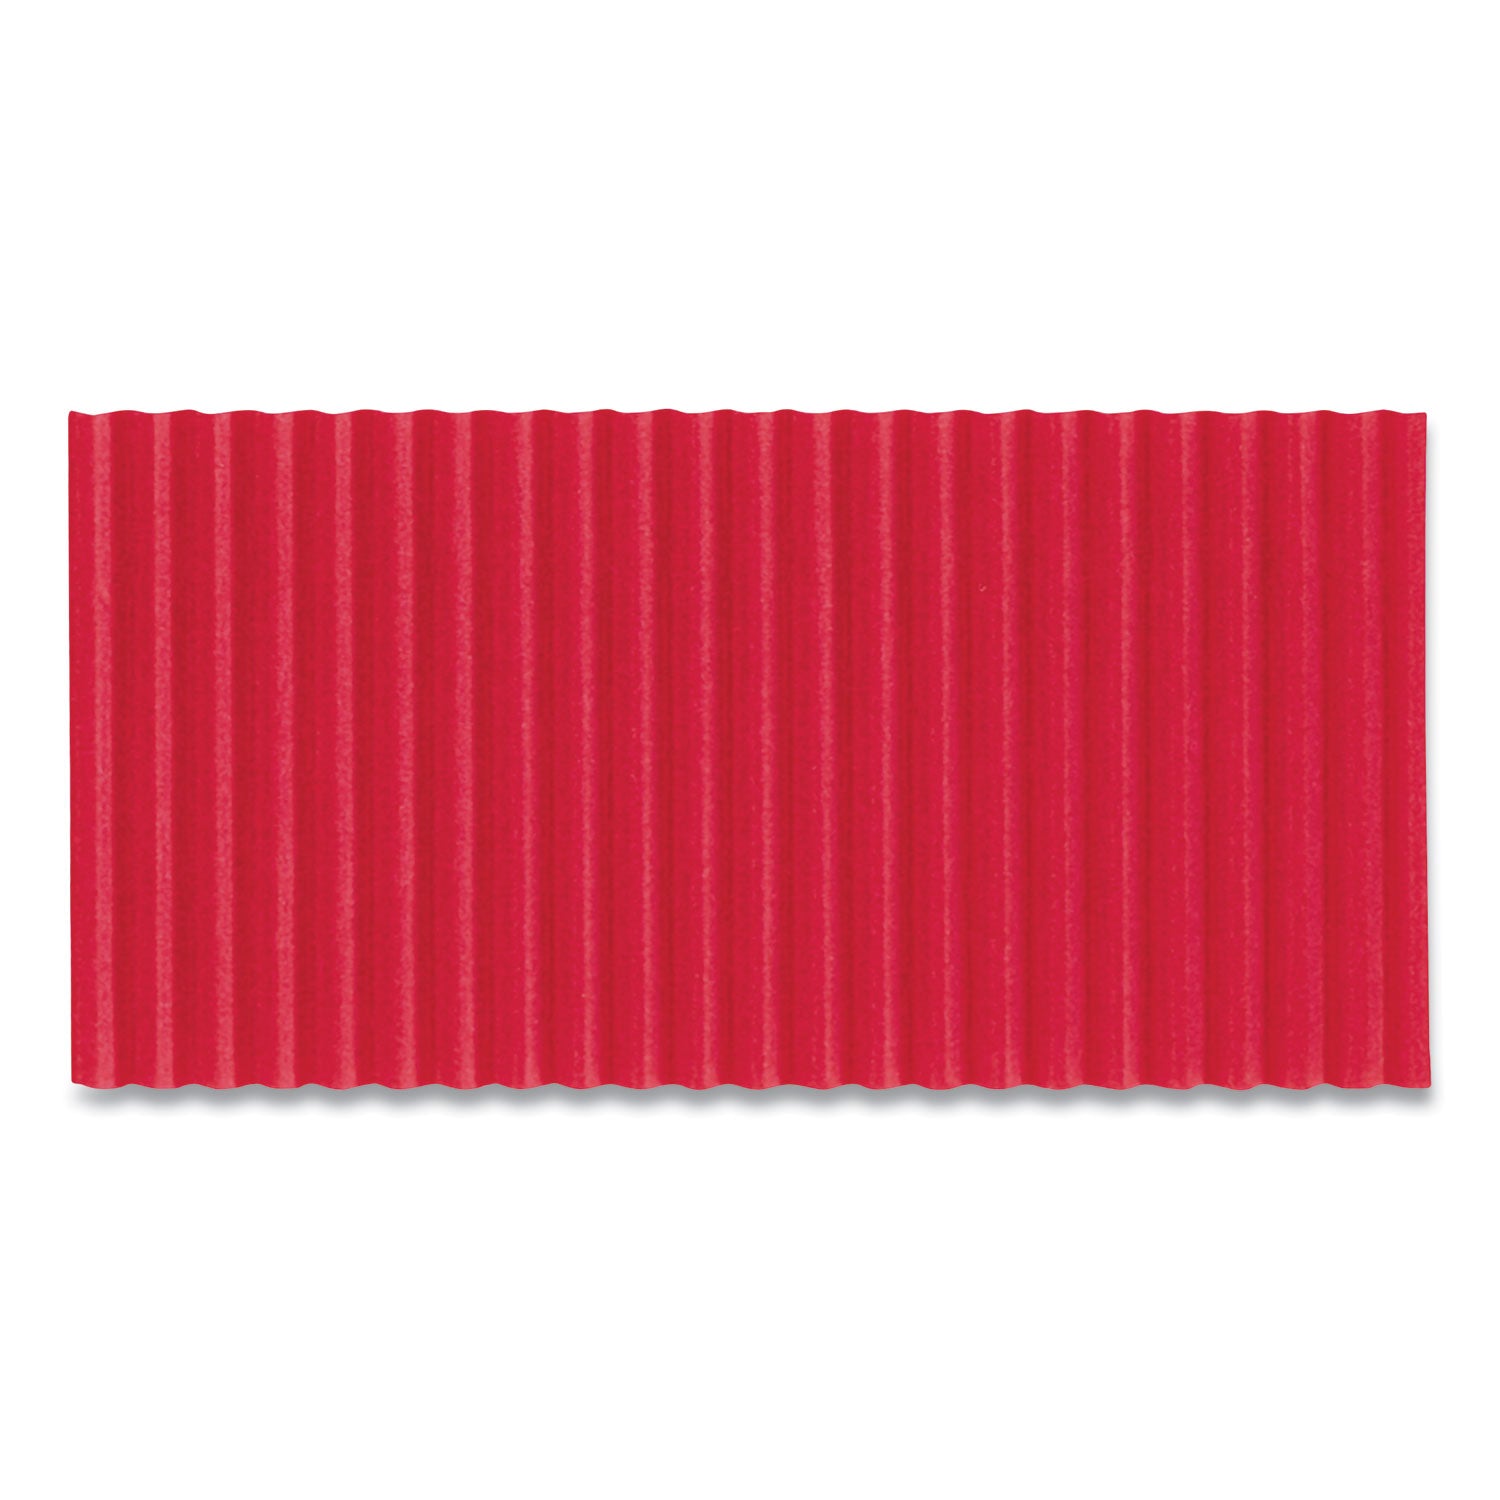 corobuff-corrugated-paper-roll-48-x-25-ft-flame-red_pac0011031 - 1